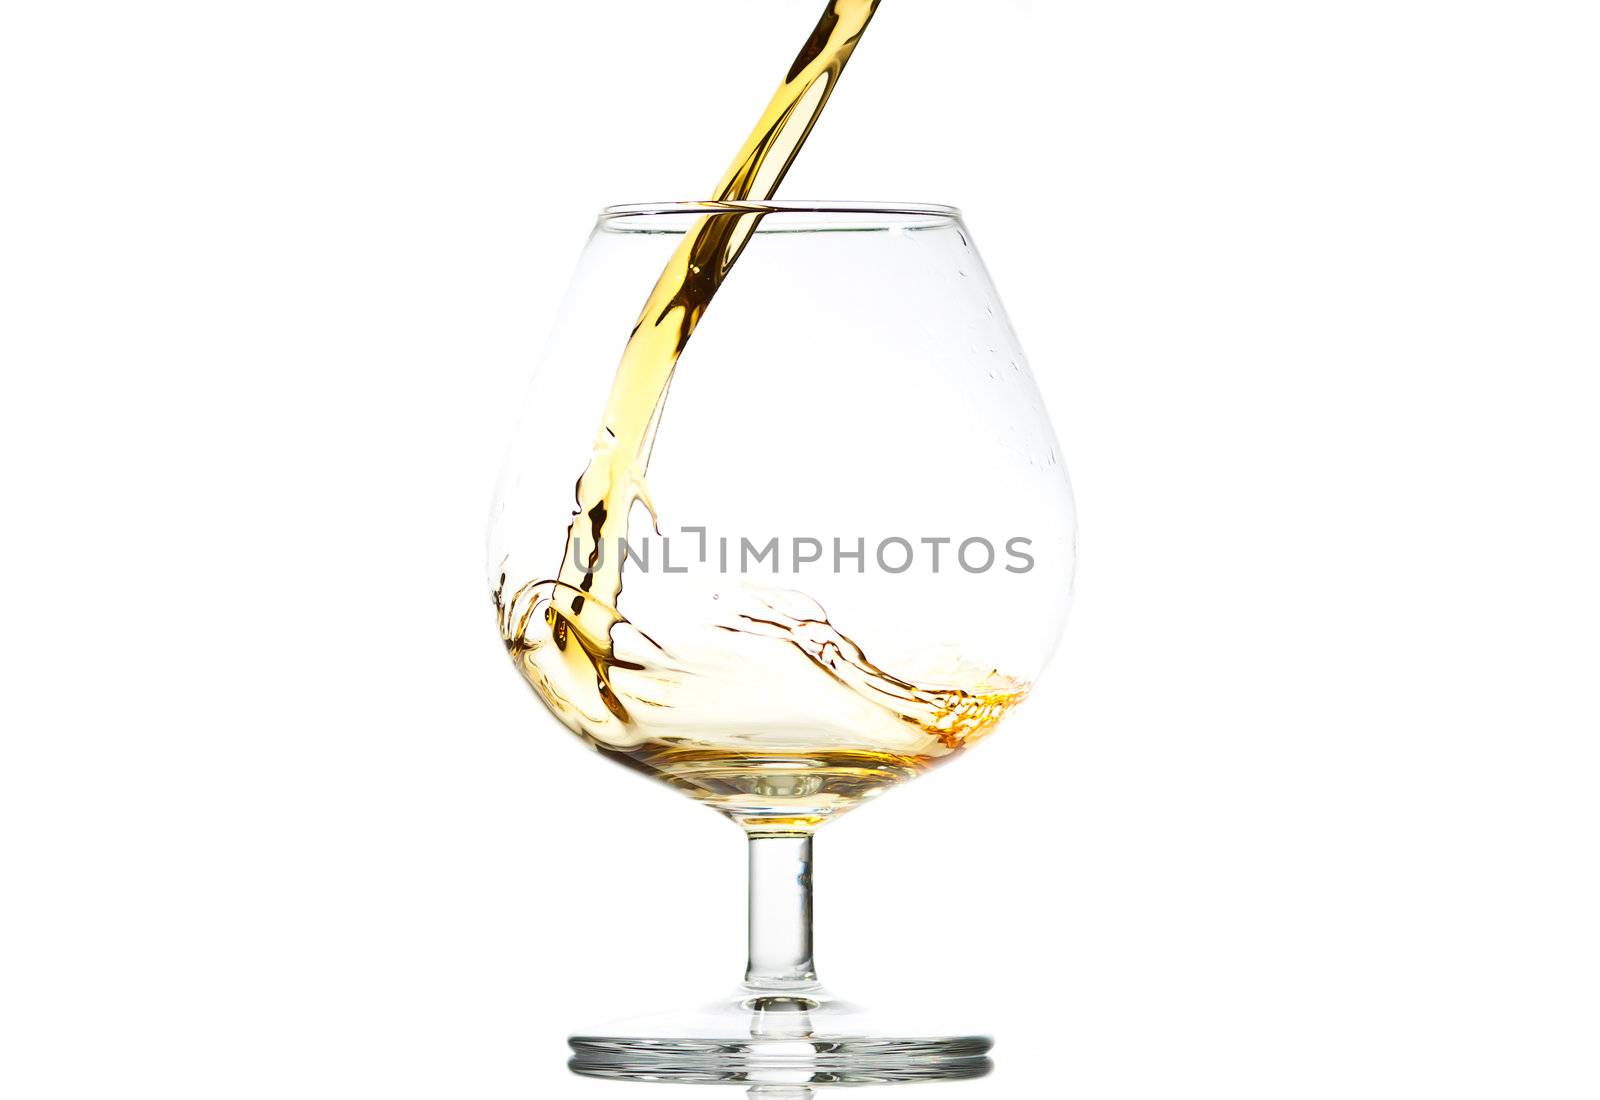 filling a glass of brandy by Discovod